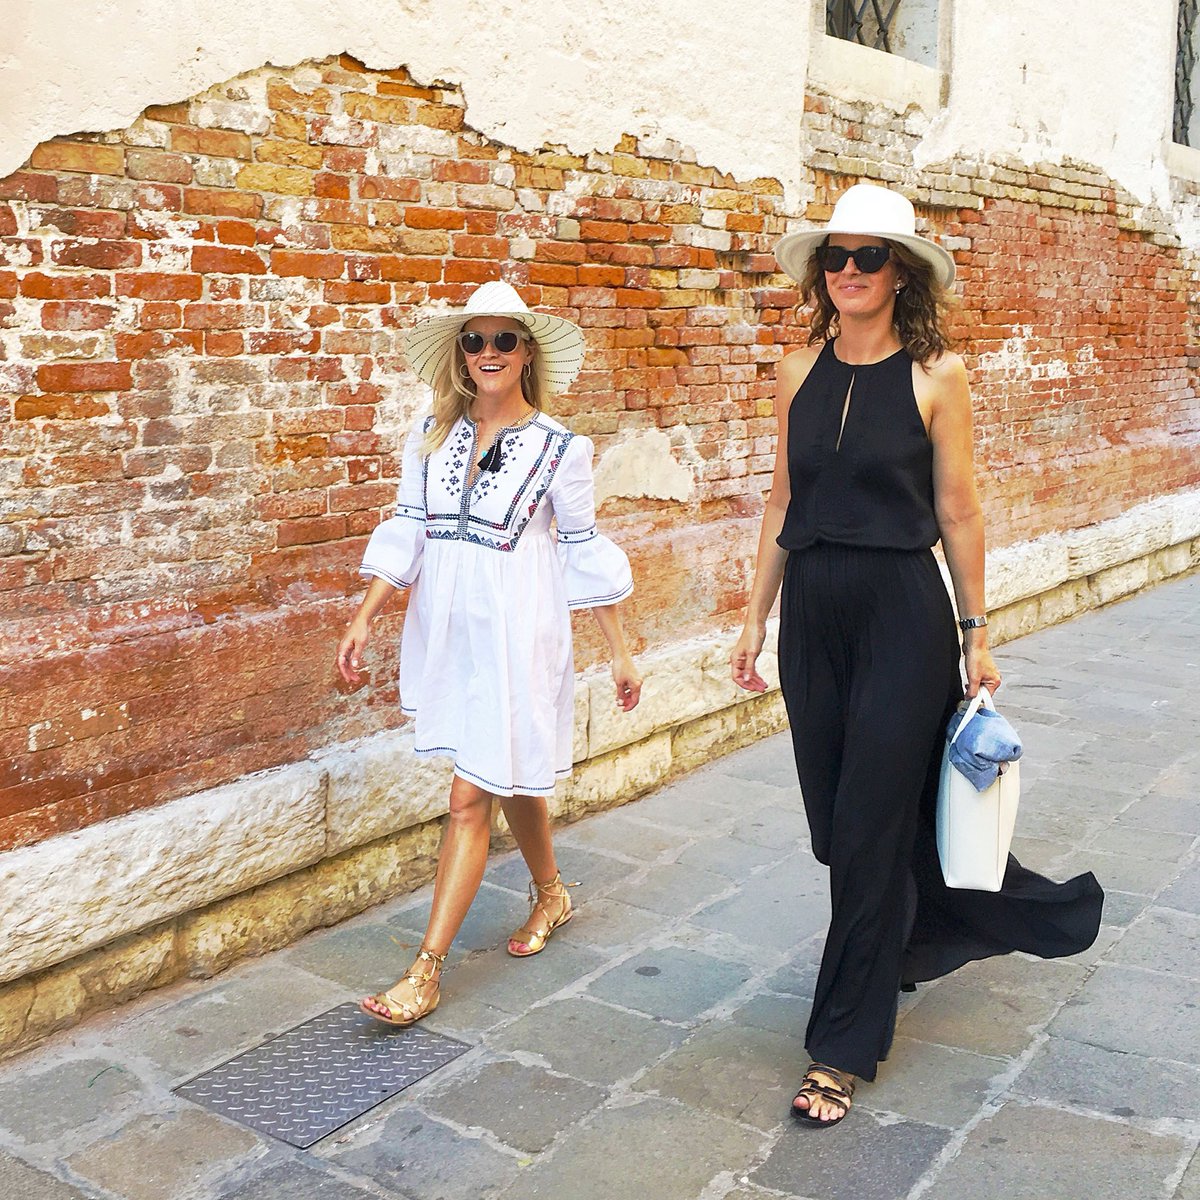 Vacation strolls with @sprinklescandac ❤️ #GirlsTrip2016 #SummerAdventures https://t.co/qtUiRB9npi